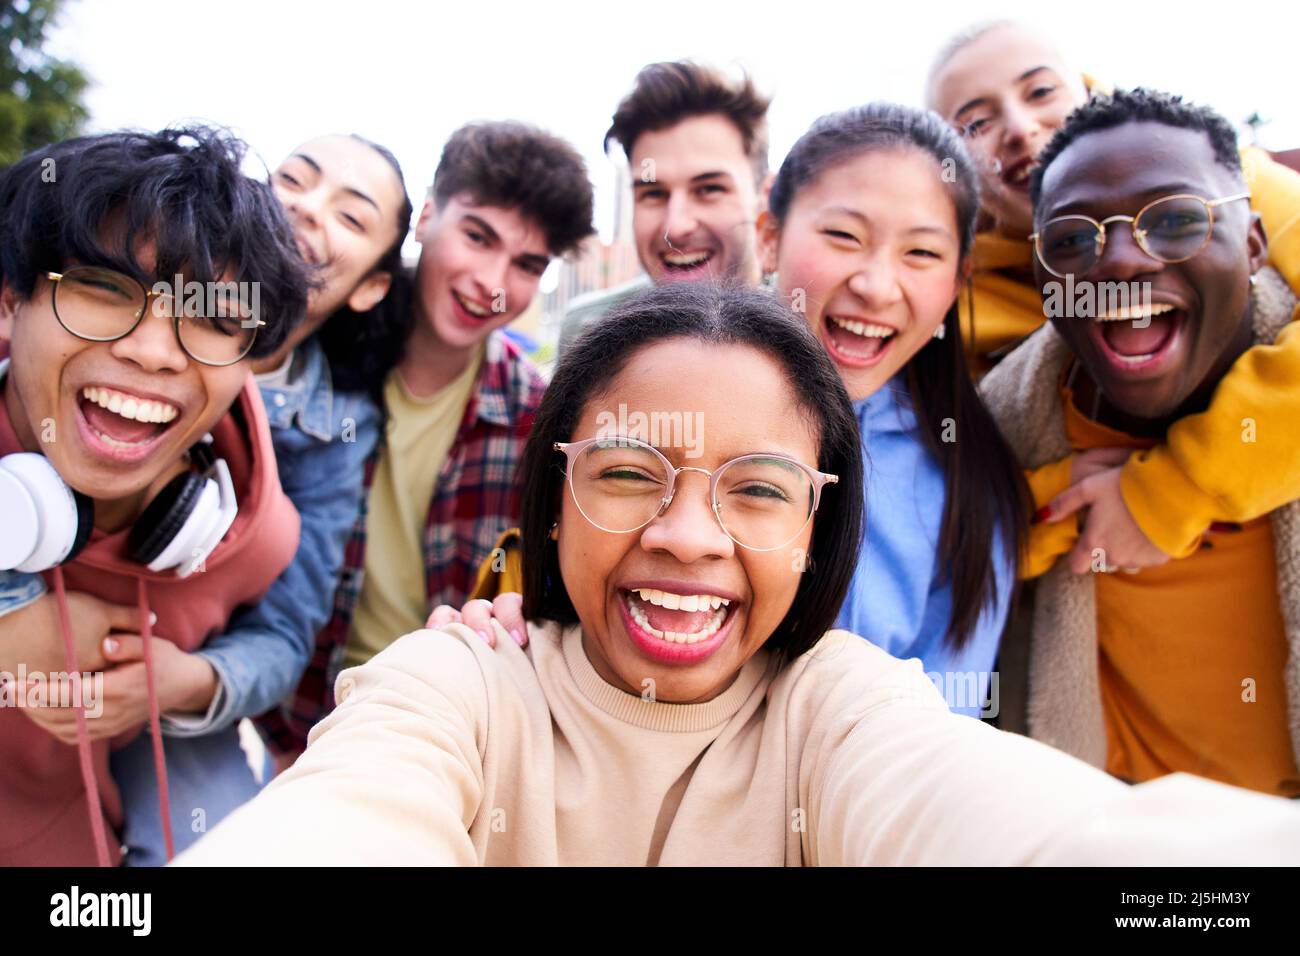 Big group of cheerful young friends taking selfie portrait. Happy students people looking at the camera smiling. Concept of community, colleague Stock Photo